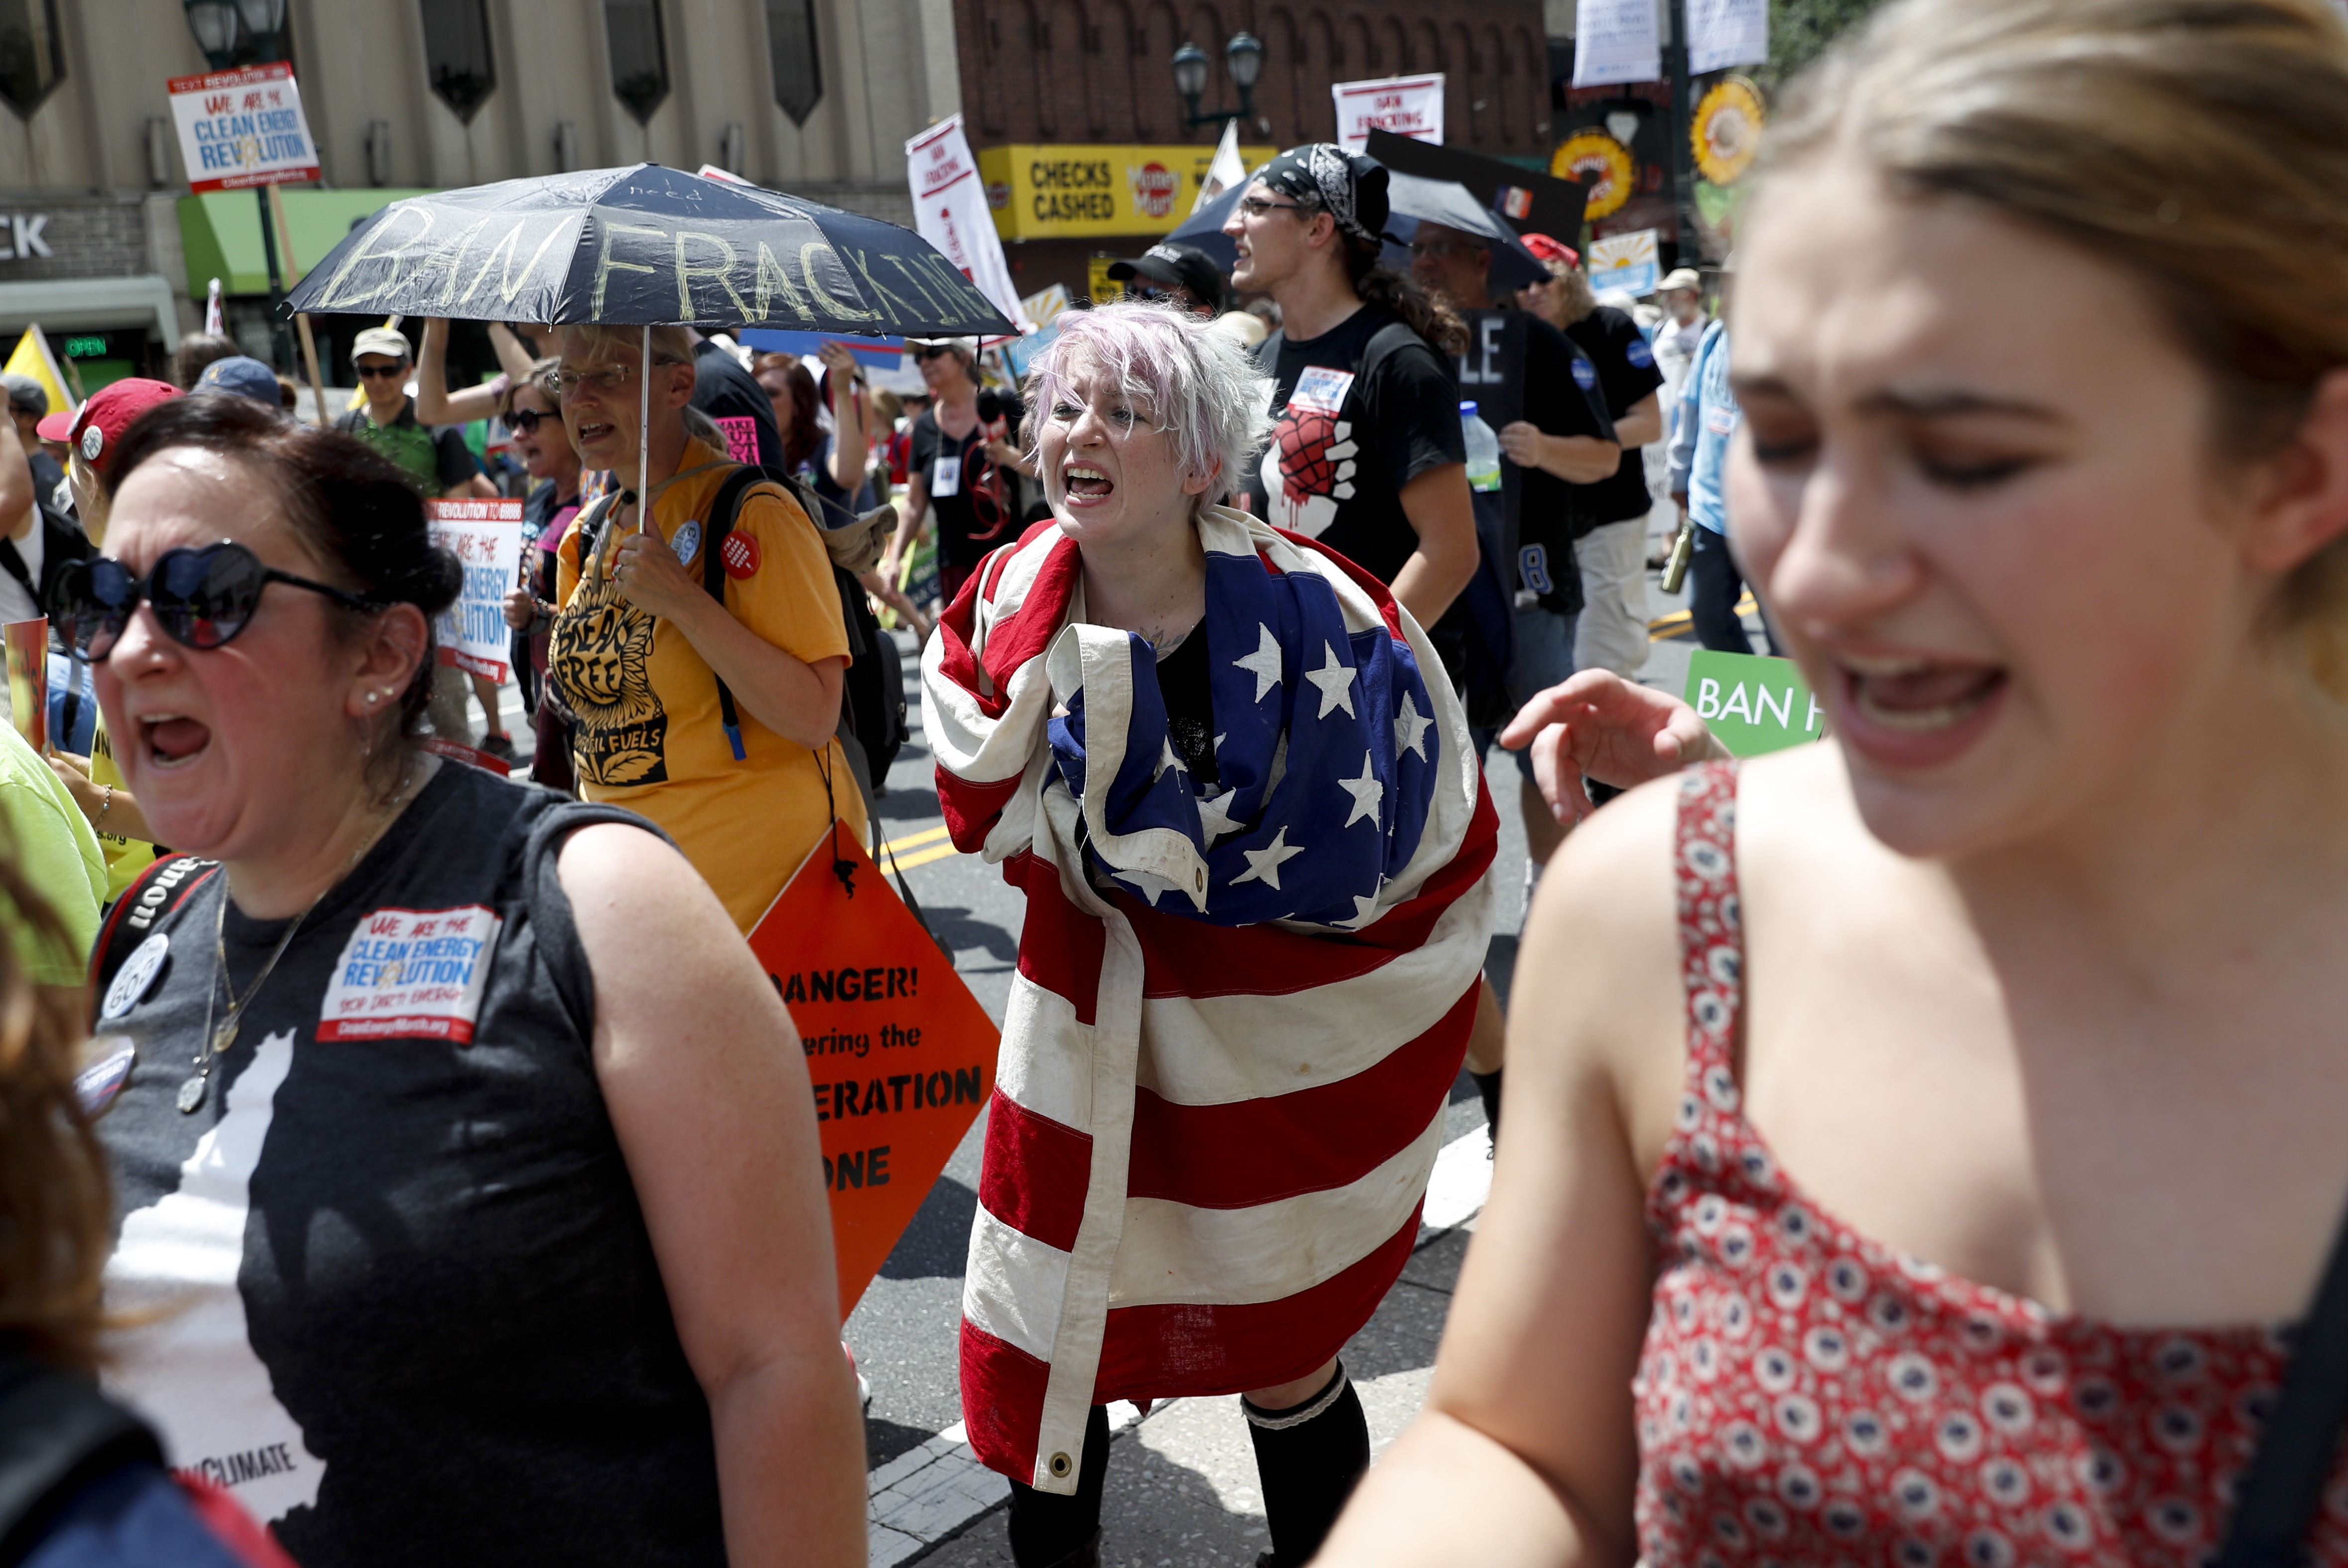 Protesters yell during a demonstration in downtown on Sunday, July 24, 2016, in Philadelphia. (John Minchillo—AP)